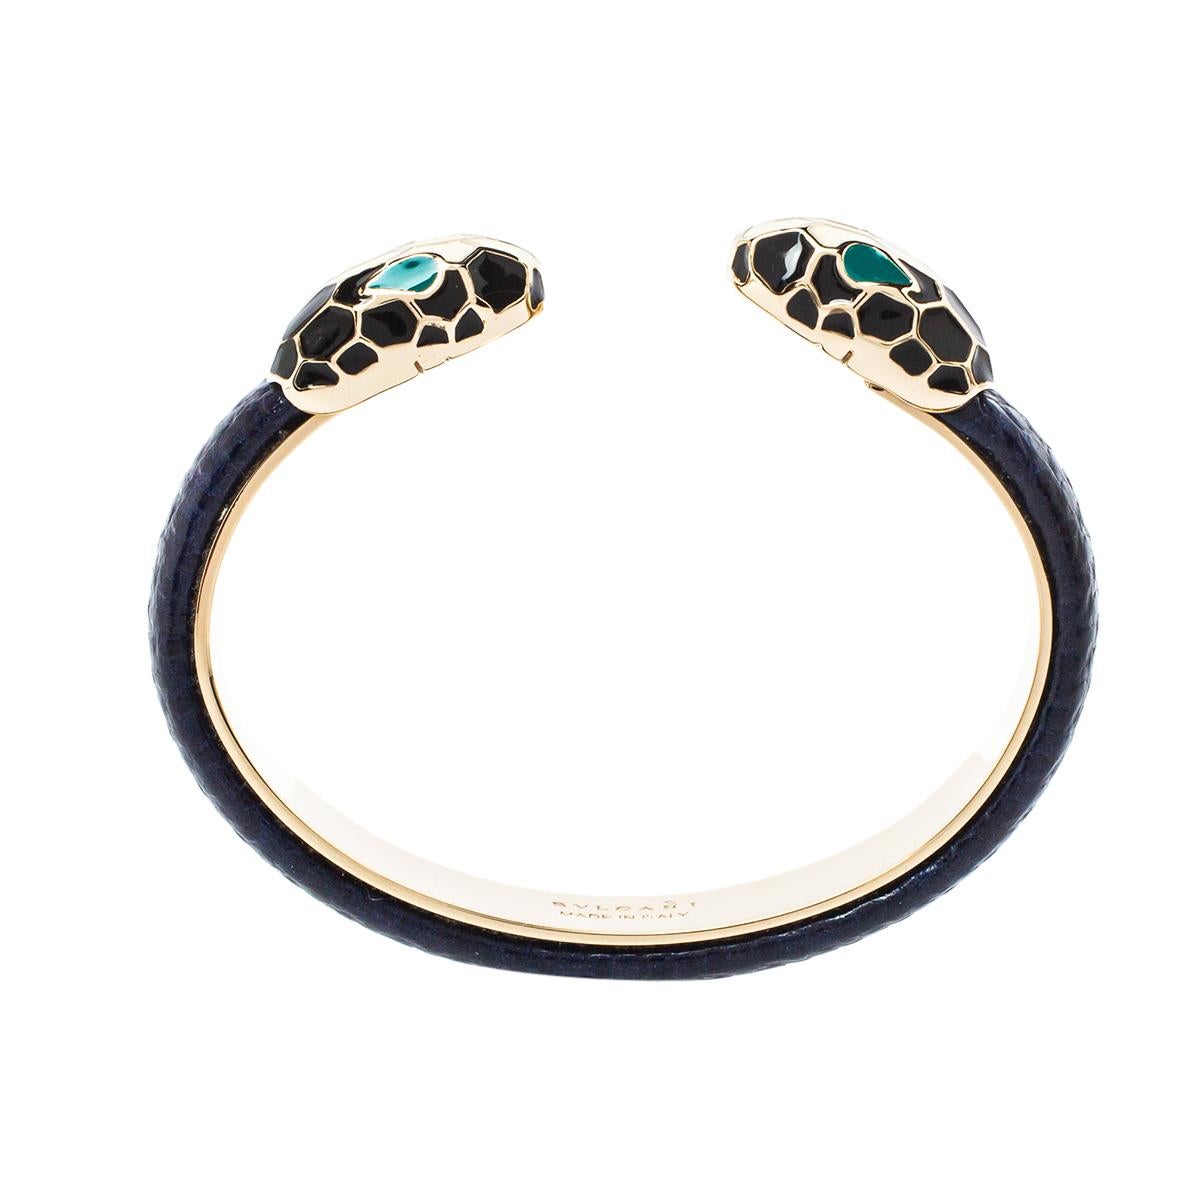 Created using gold-plated metal and karung leather, this Bvlgari Serpenti Forever open cuff bracelet is highlighted with Serpenti heads on its ends. It's a signature Bvlgari style that you'll love wearing.

Includes: Branded Pouch